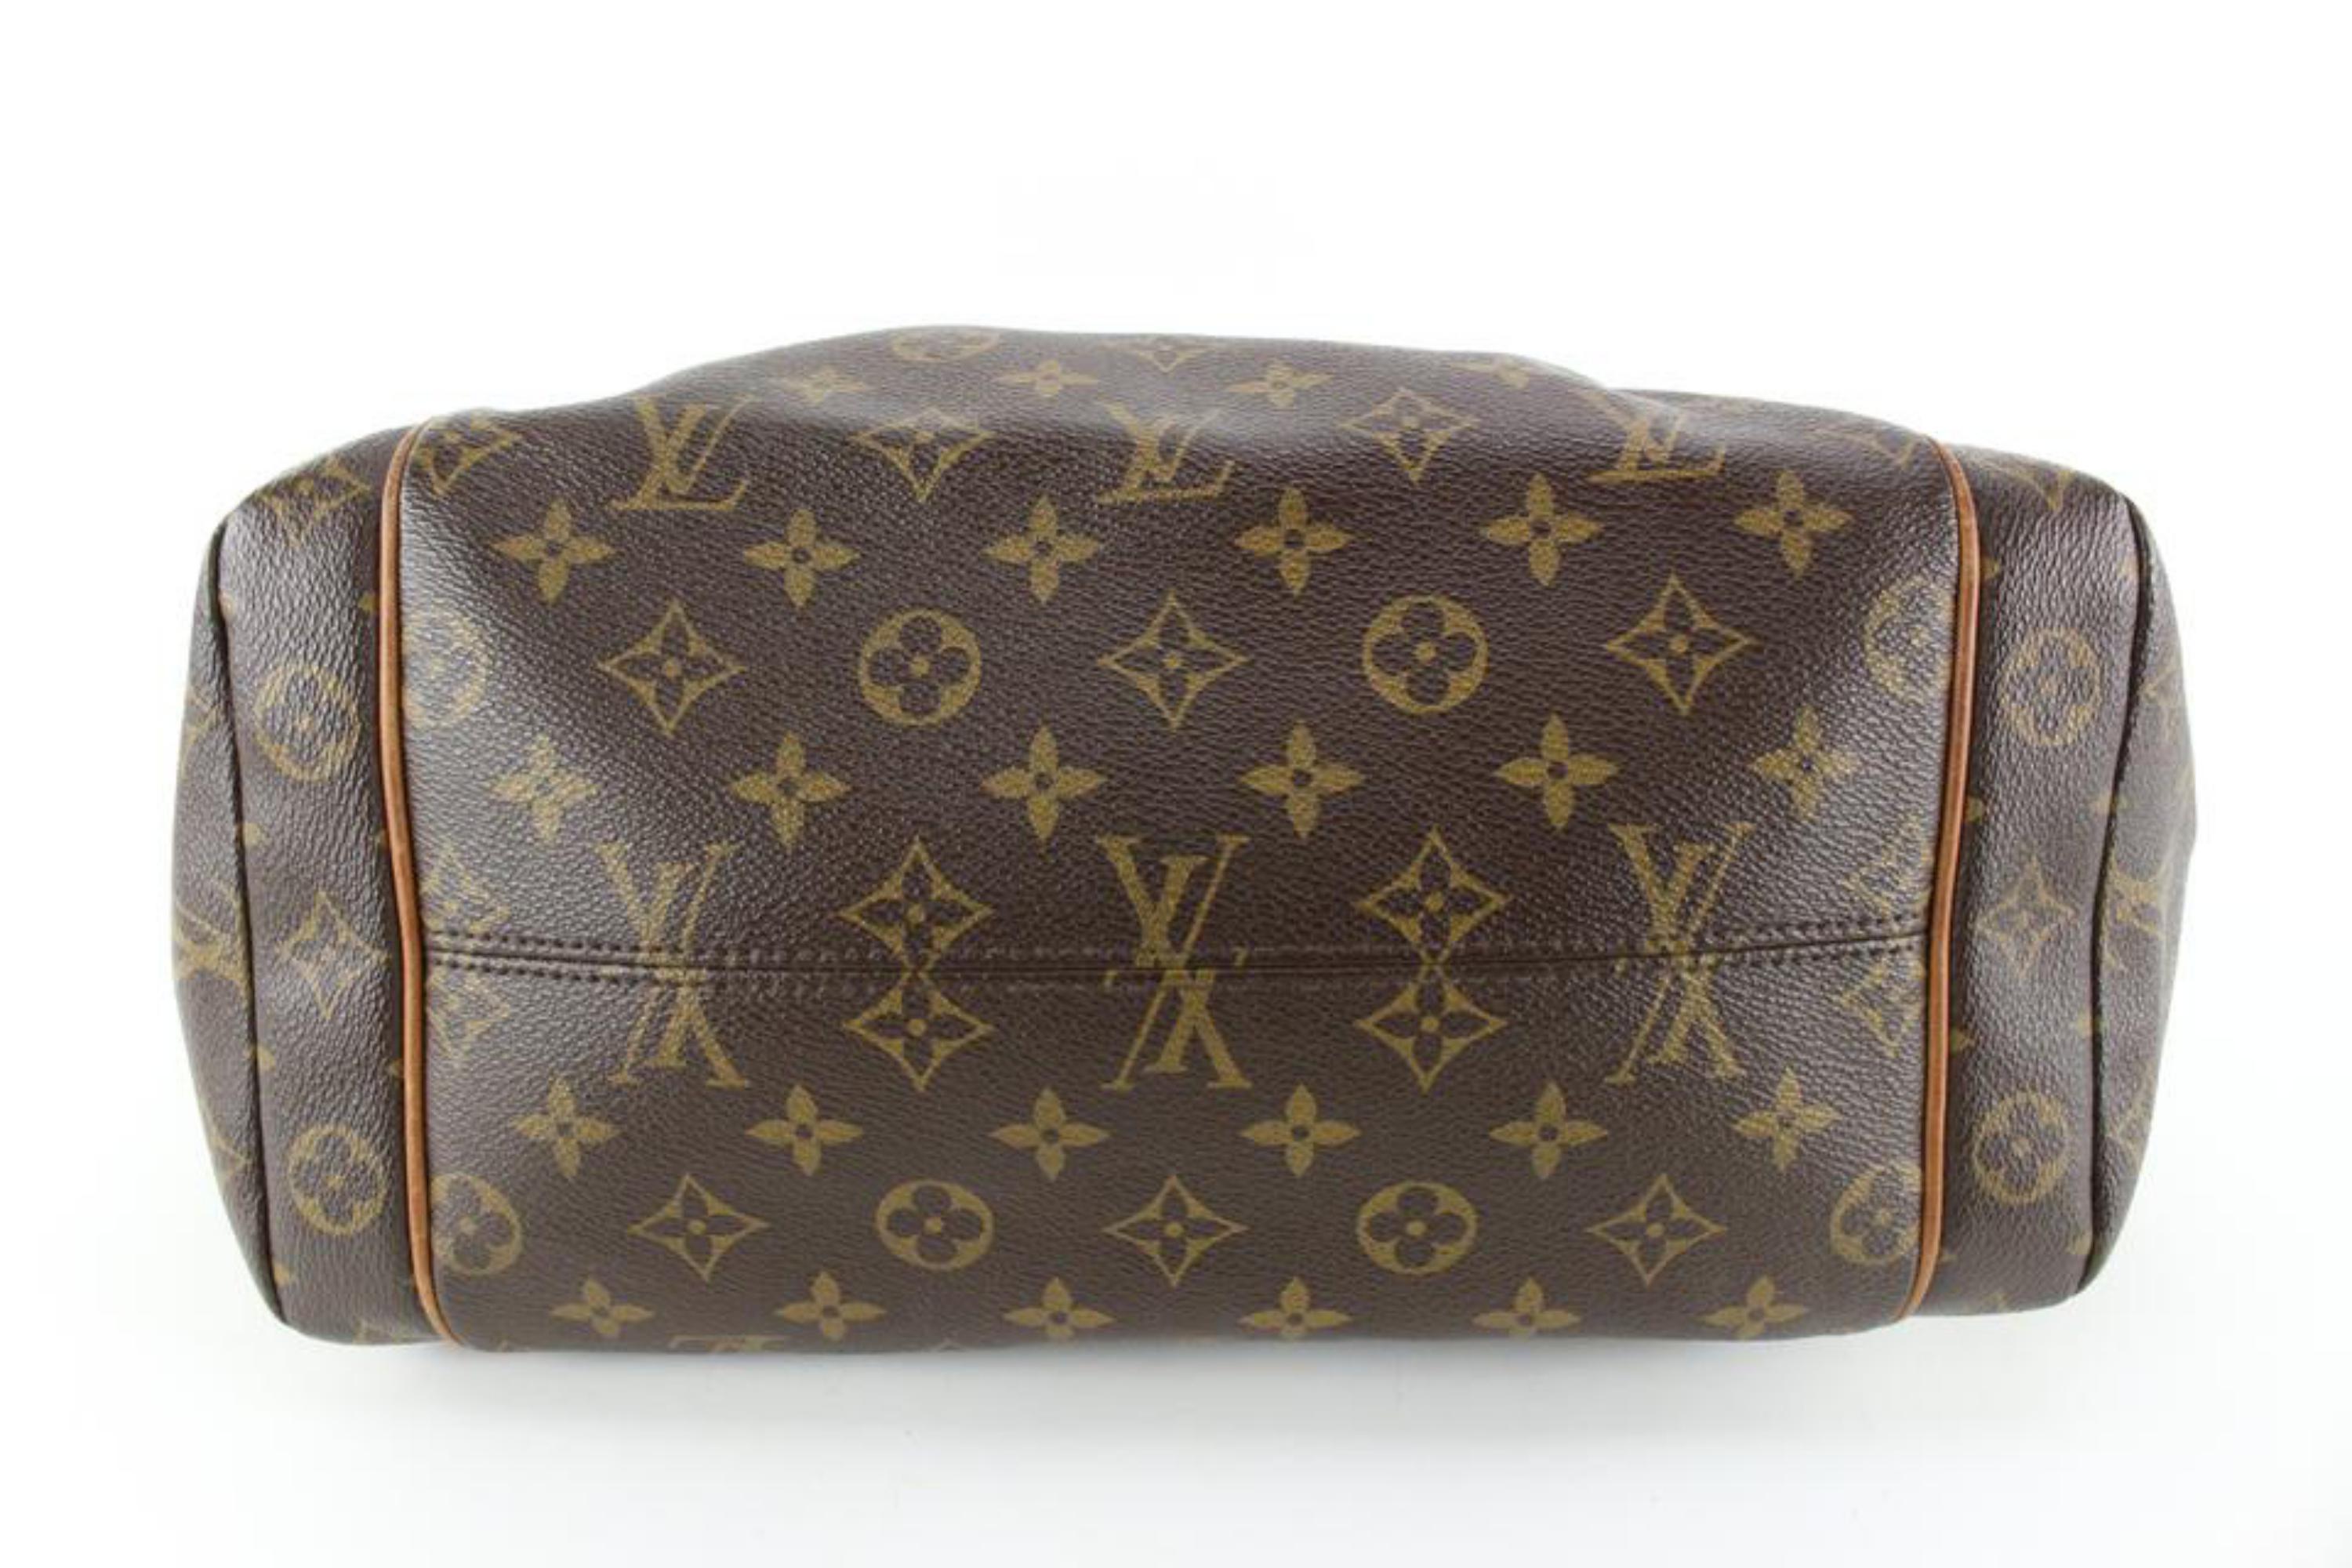 Louis Vuitton Monogram Totally PM Tote Bag 14lz720s In Good Condition For Sale In Dix hills, NY